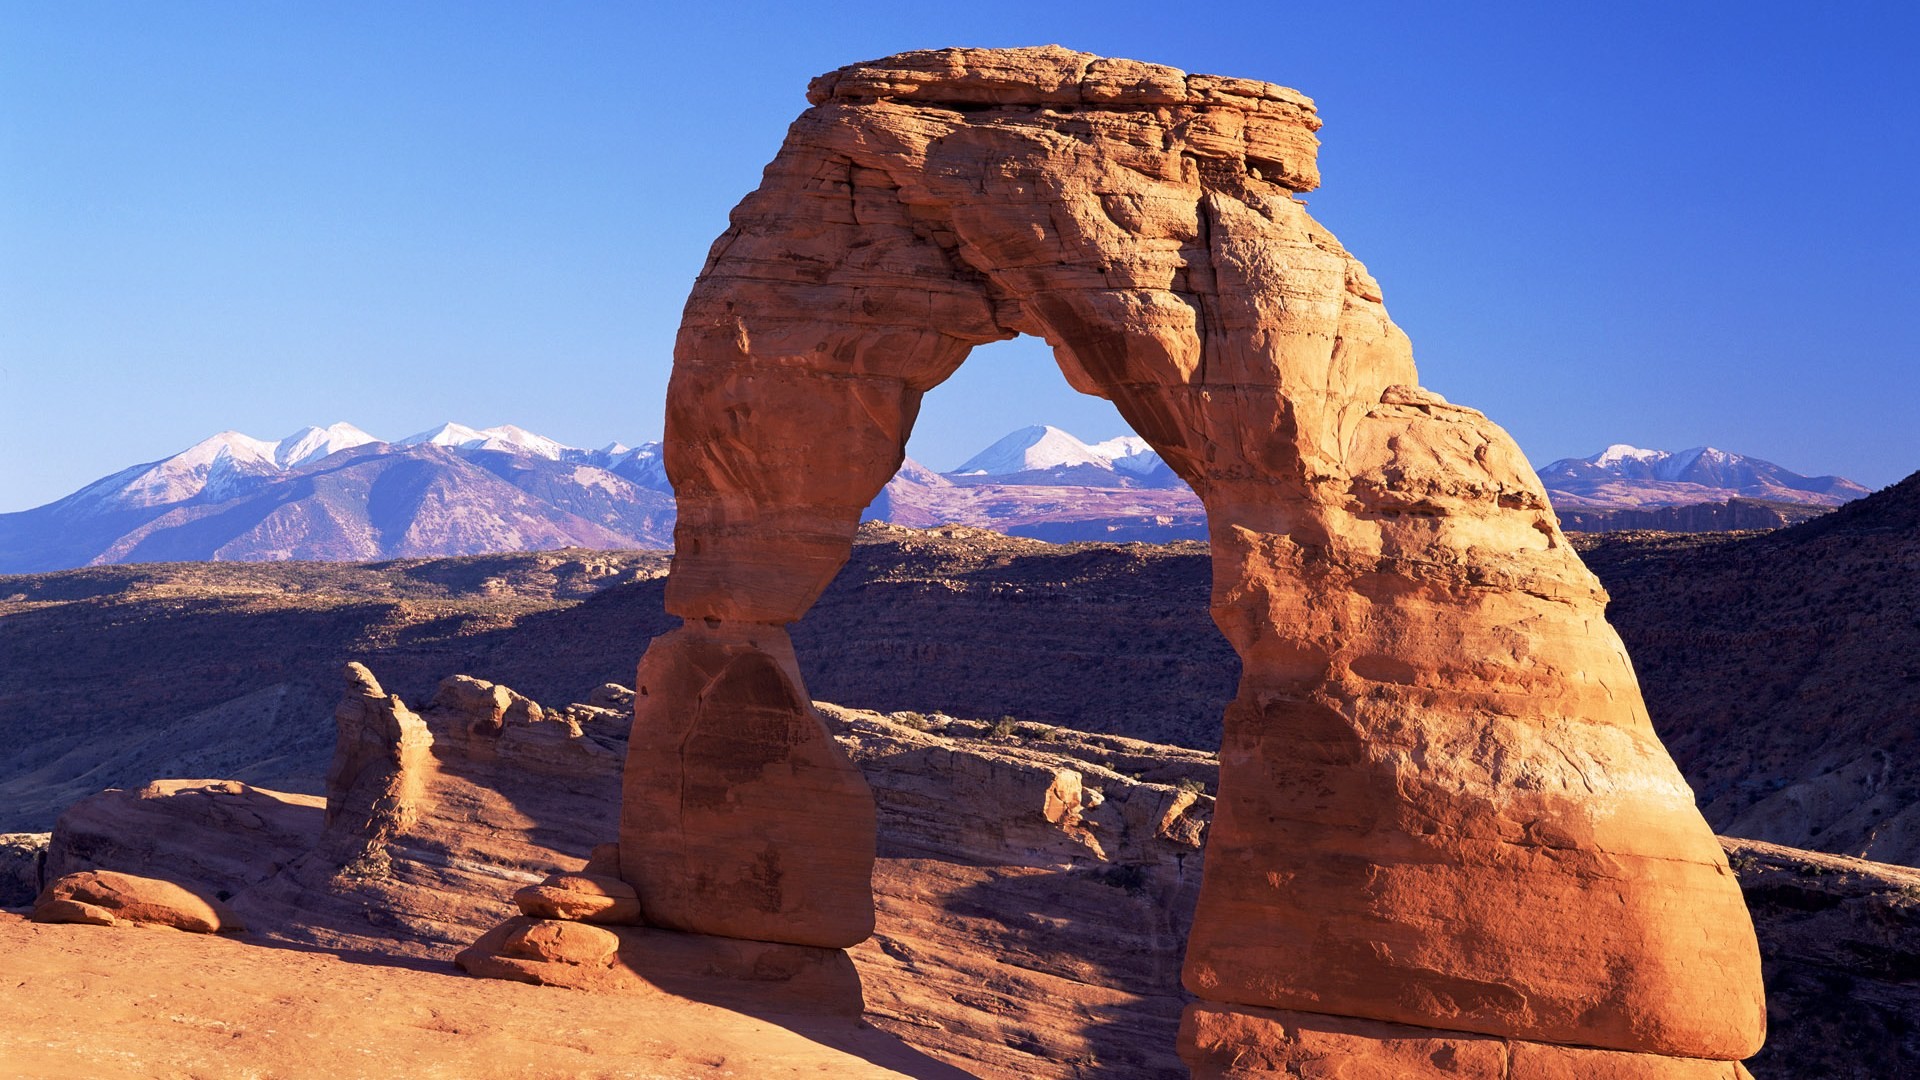 Arches National Park Wallpaper Wallpaper Free Download 1920 1200 Arches National Park Wallpapers 40 1920x1080